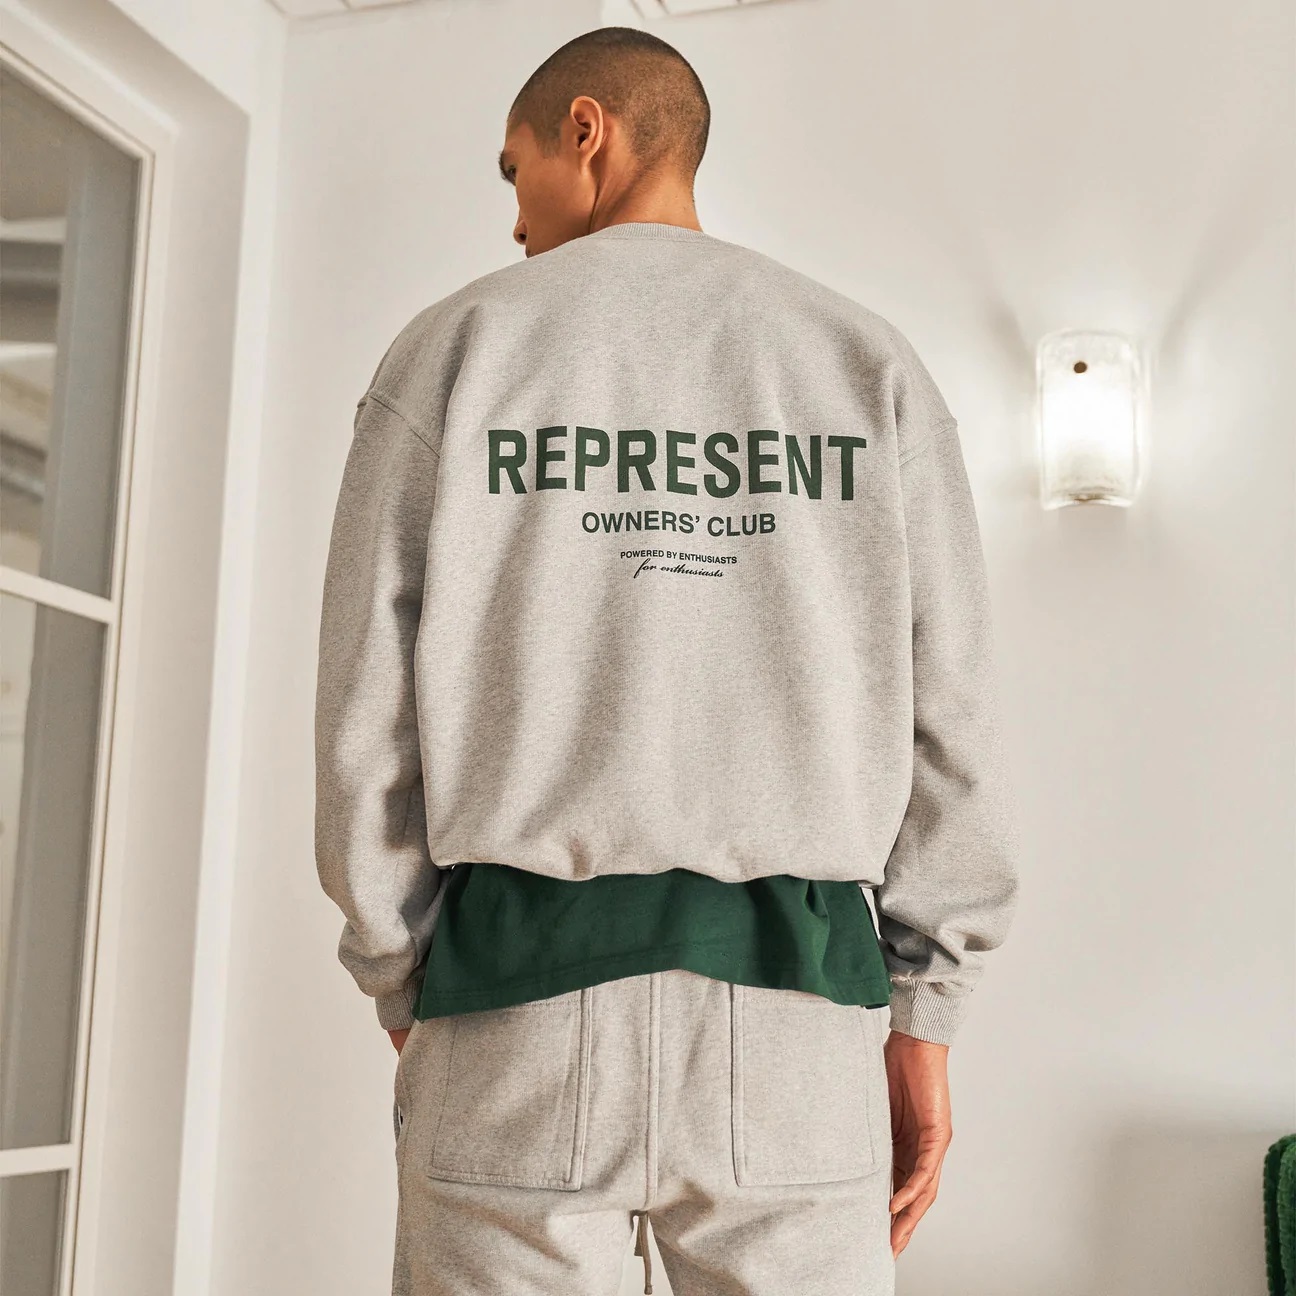 Represent Owners Club Sweater in Light Grey Melange S